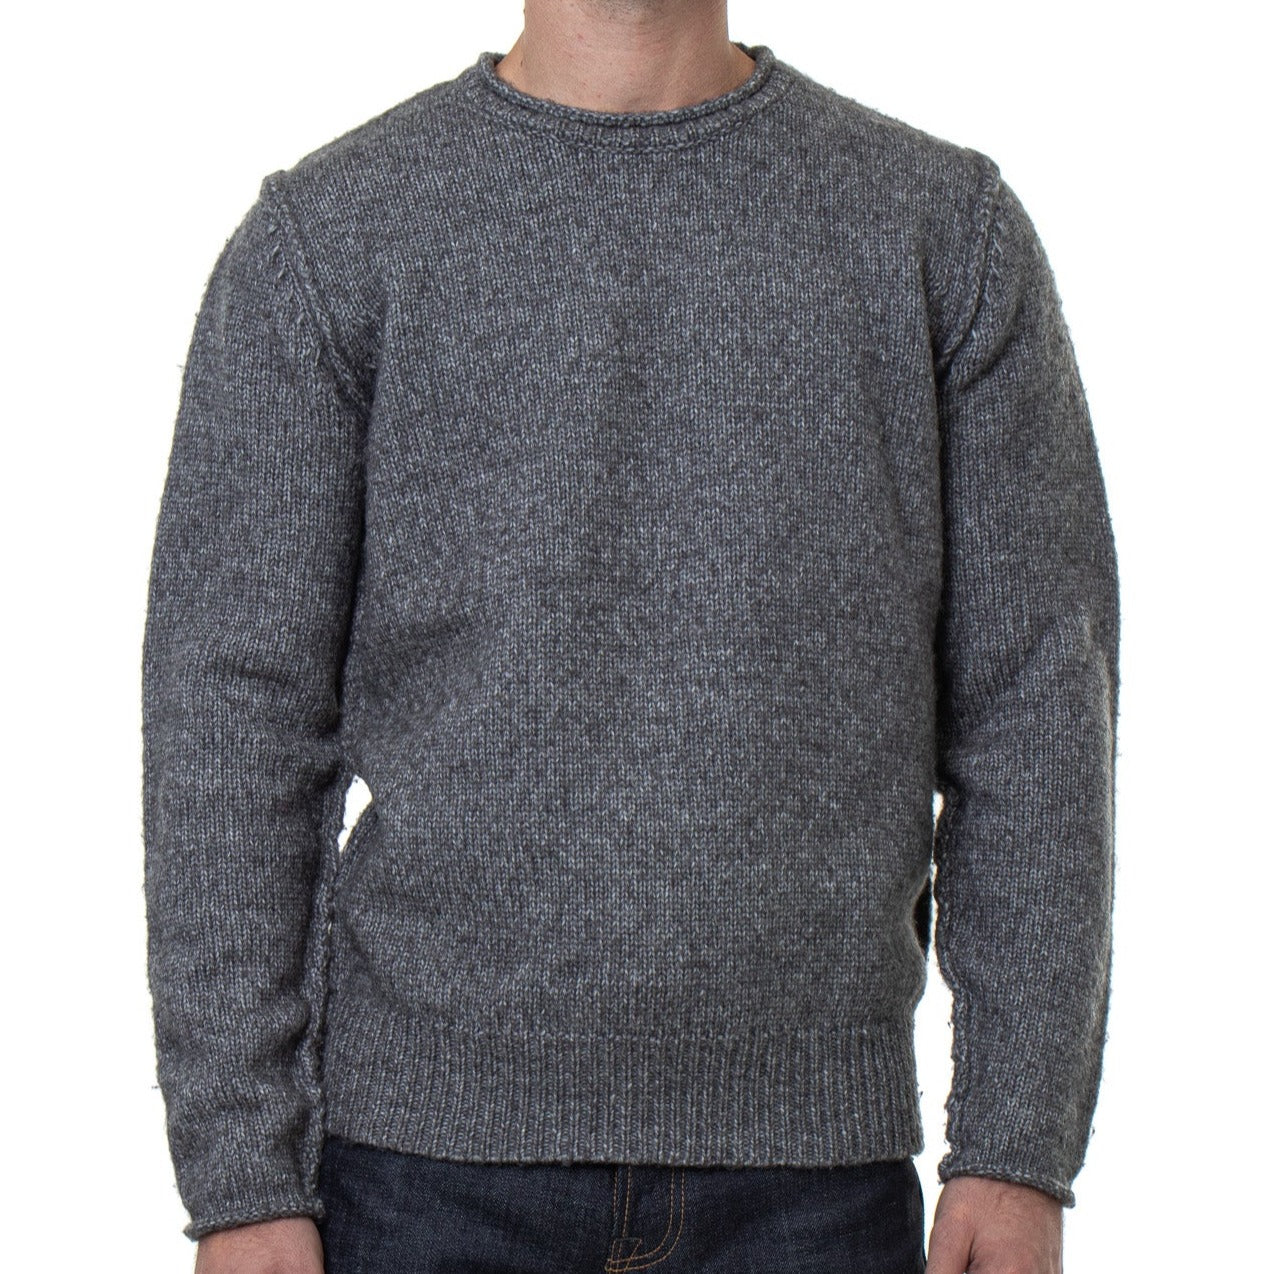 Men's Rolled Edge Sweater - Charcoal